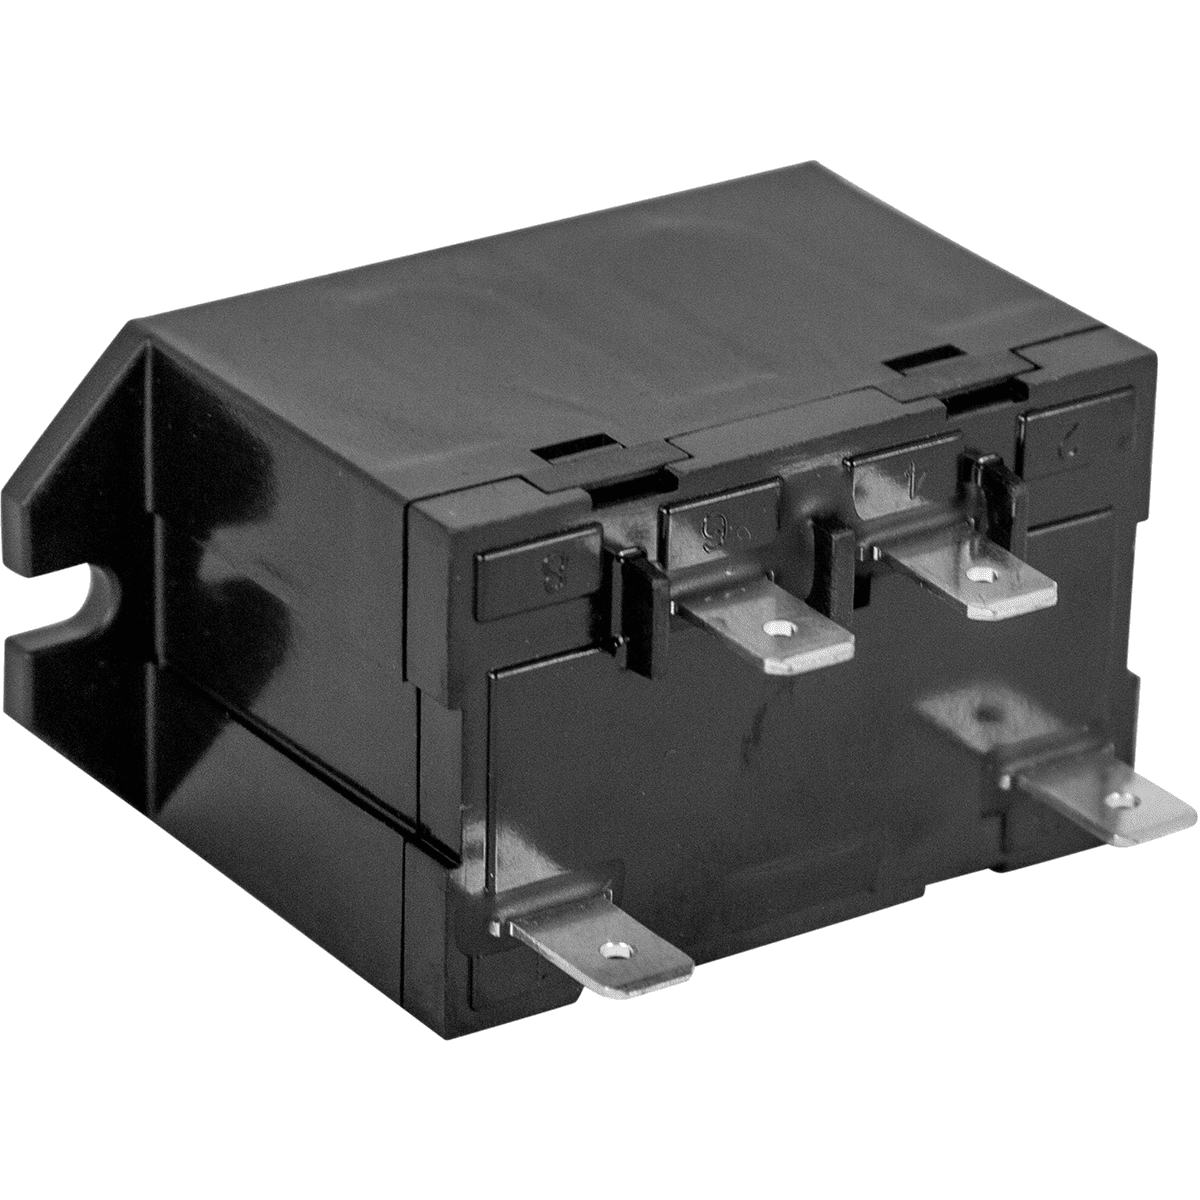 Santa Fe Replacement Compressor Relay For Advance90 & Compact70 Dehumidifiers (1970010)